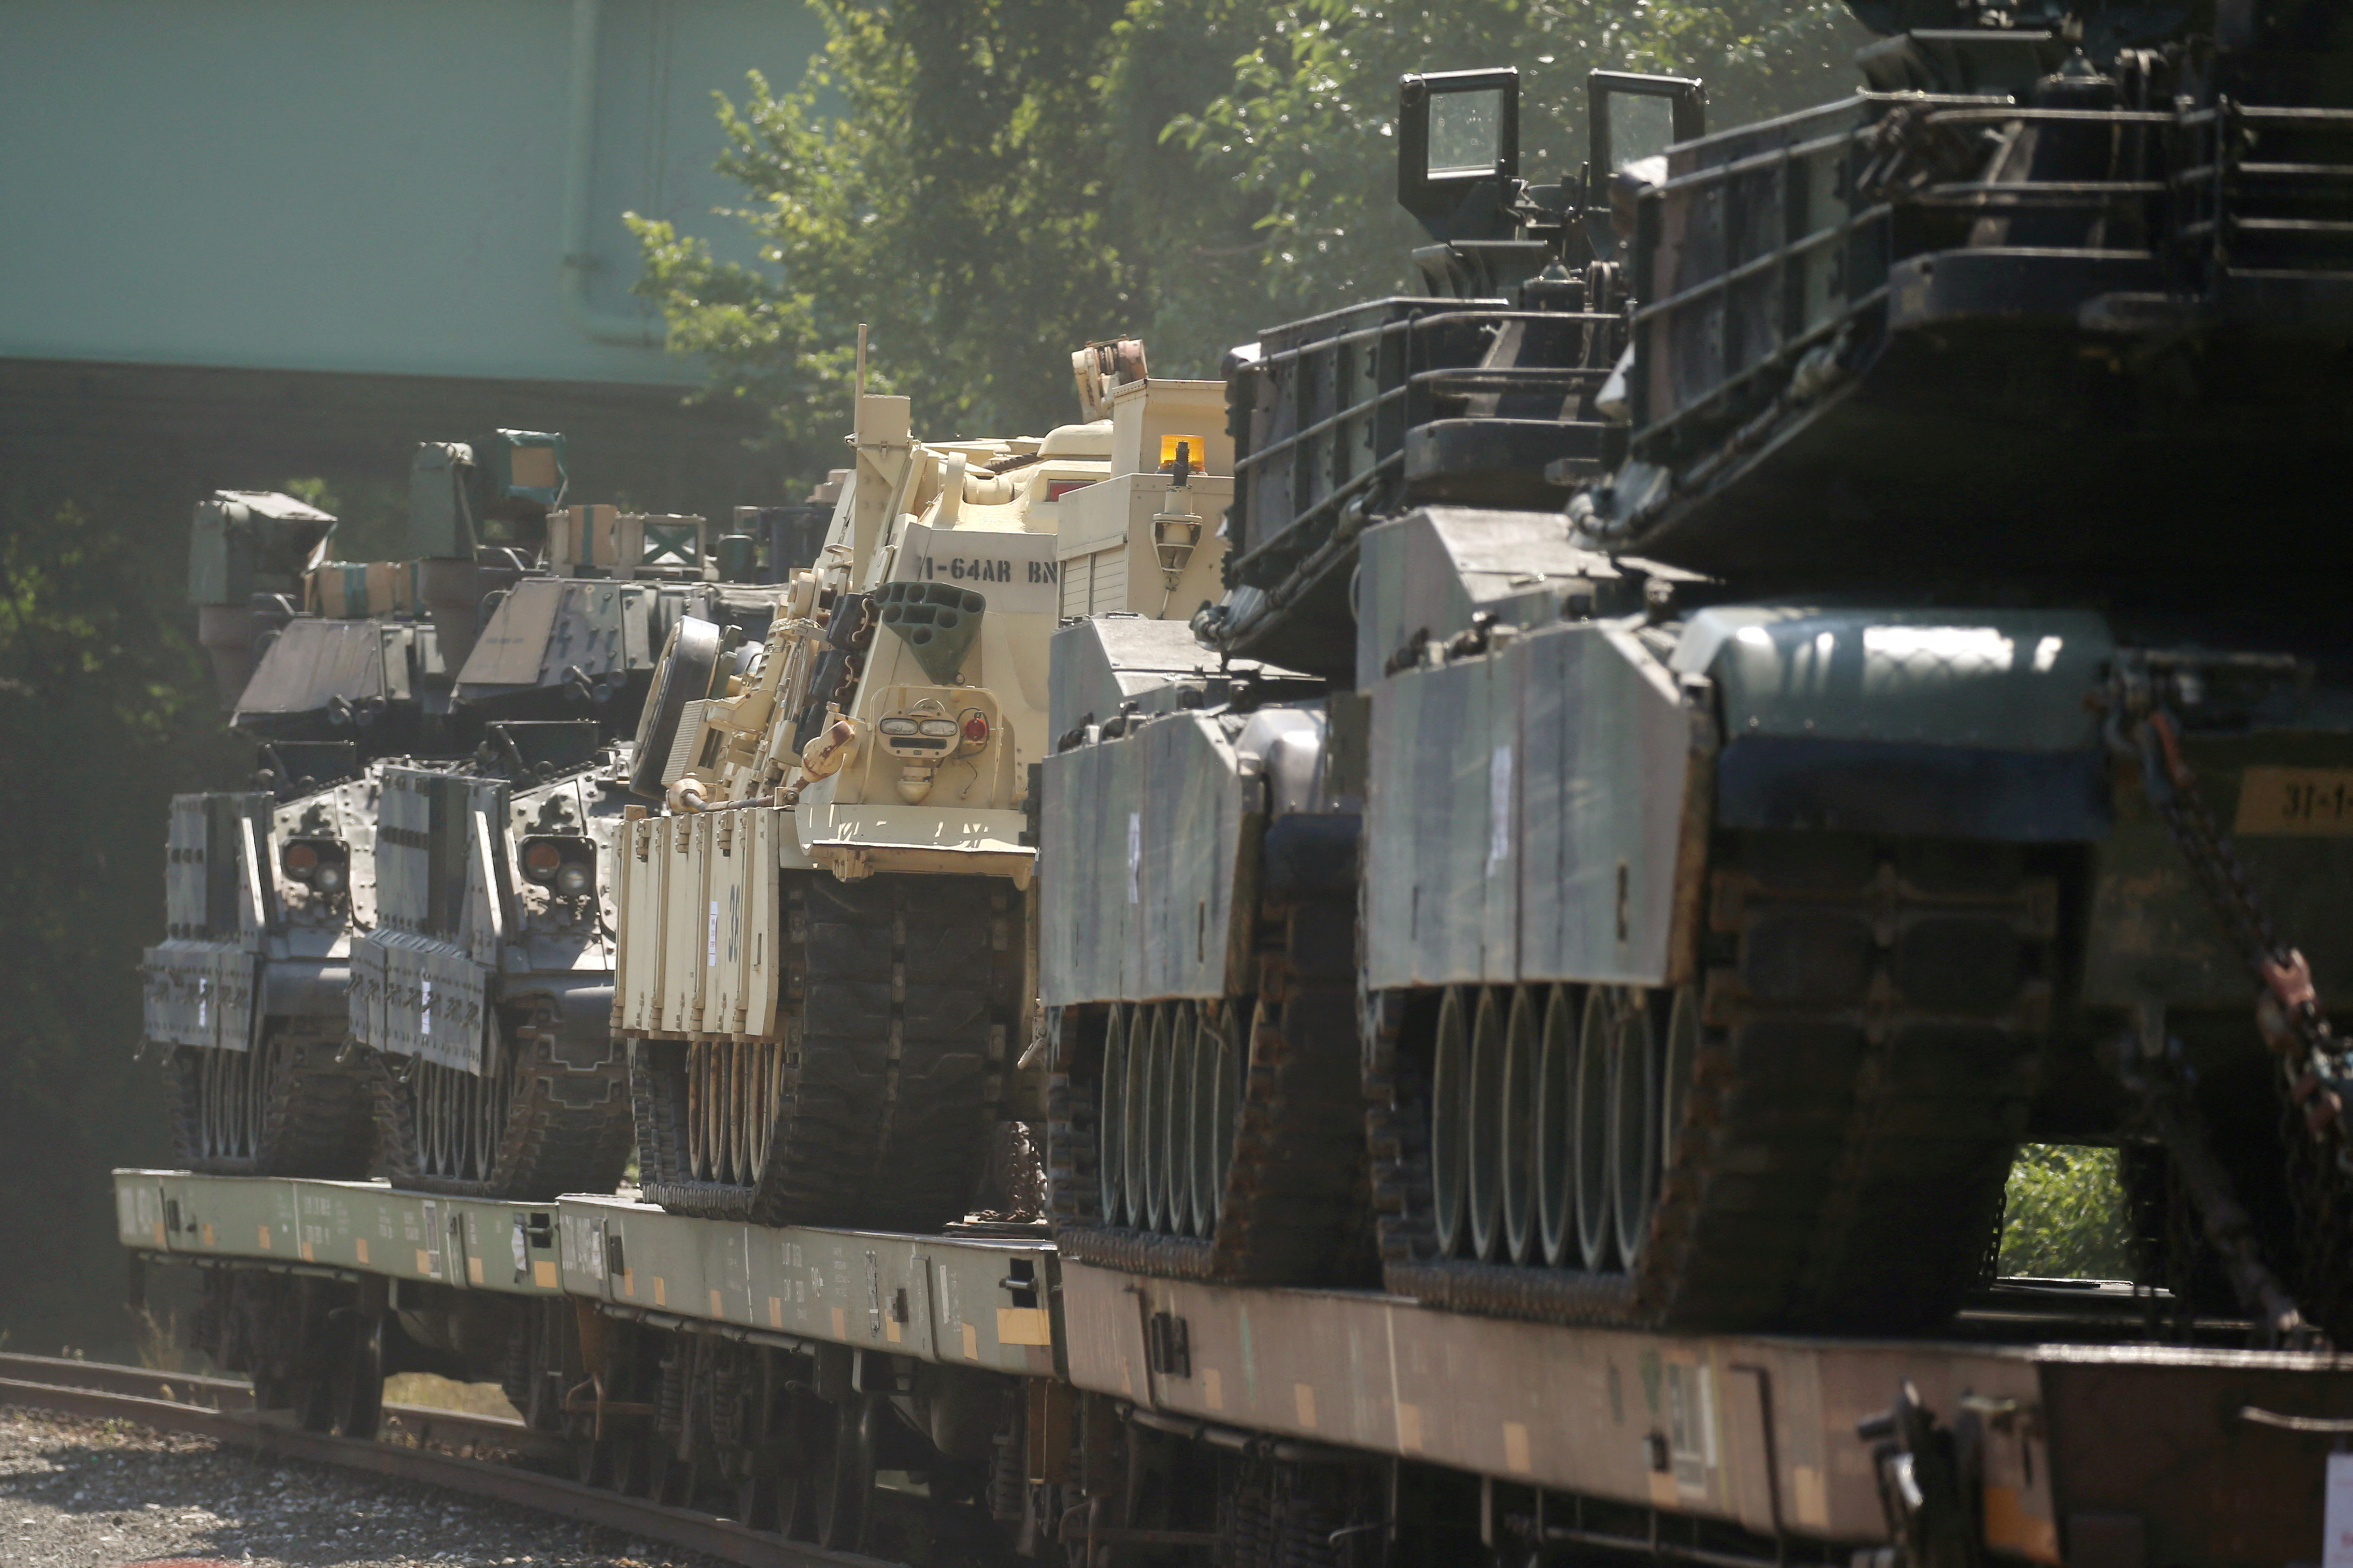 The first tanks will arrive in Ukraine only in late 2023 or early 2024 (REUTERS / Leah Millis / File Photo)